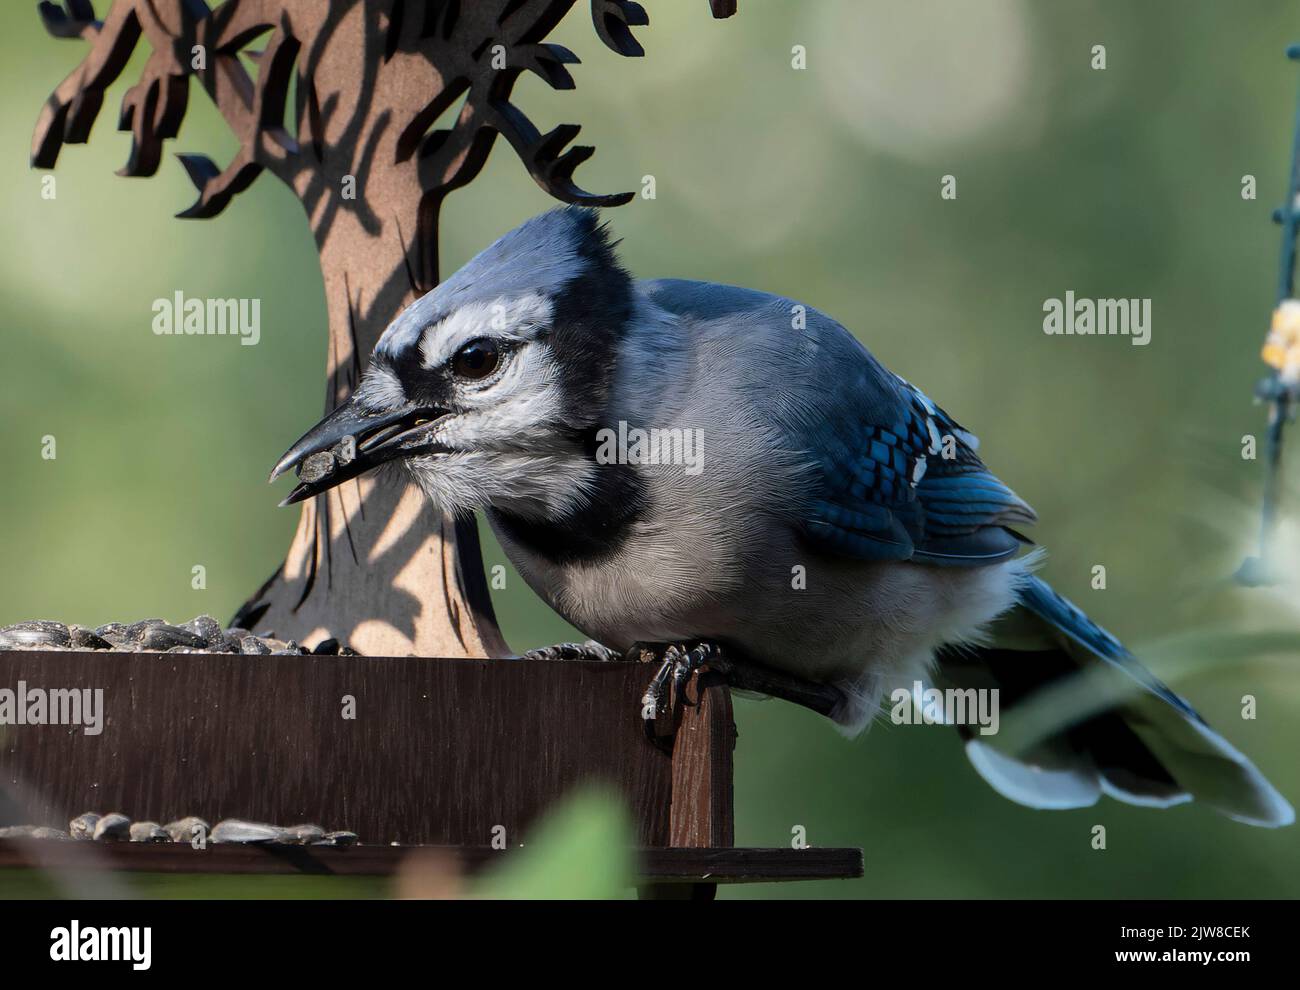 Molting Bluejay clings to the bird feeder Stock Photo